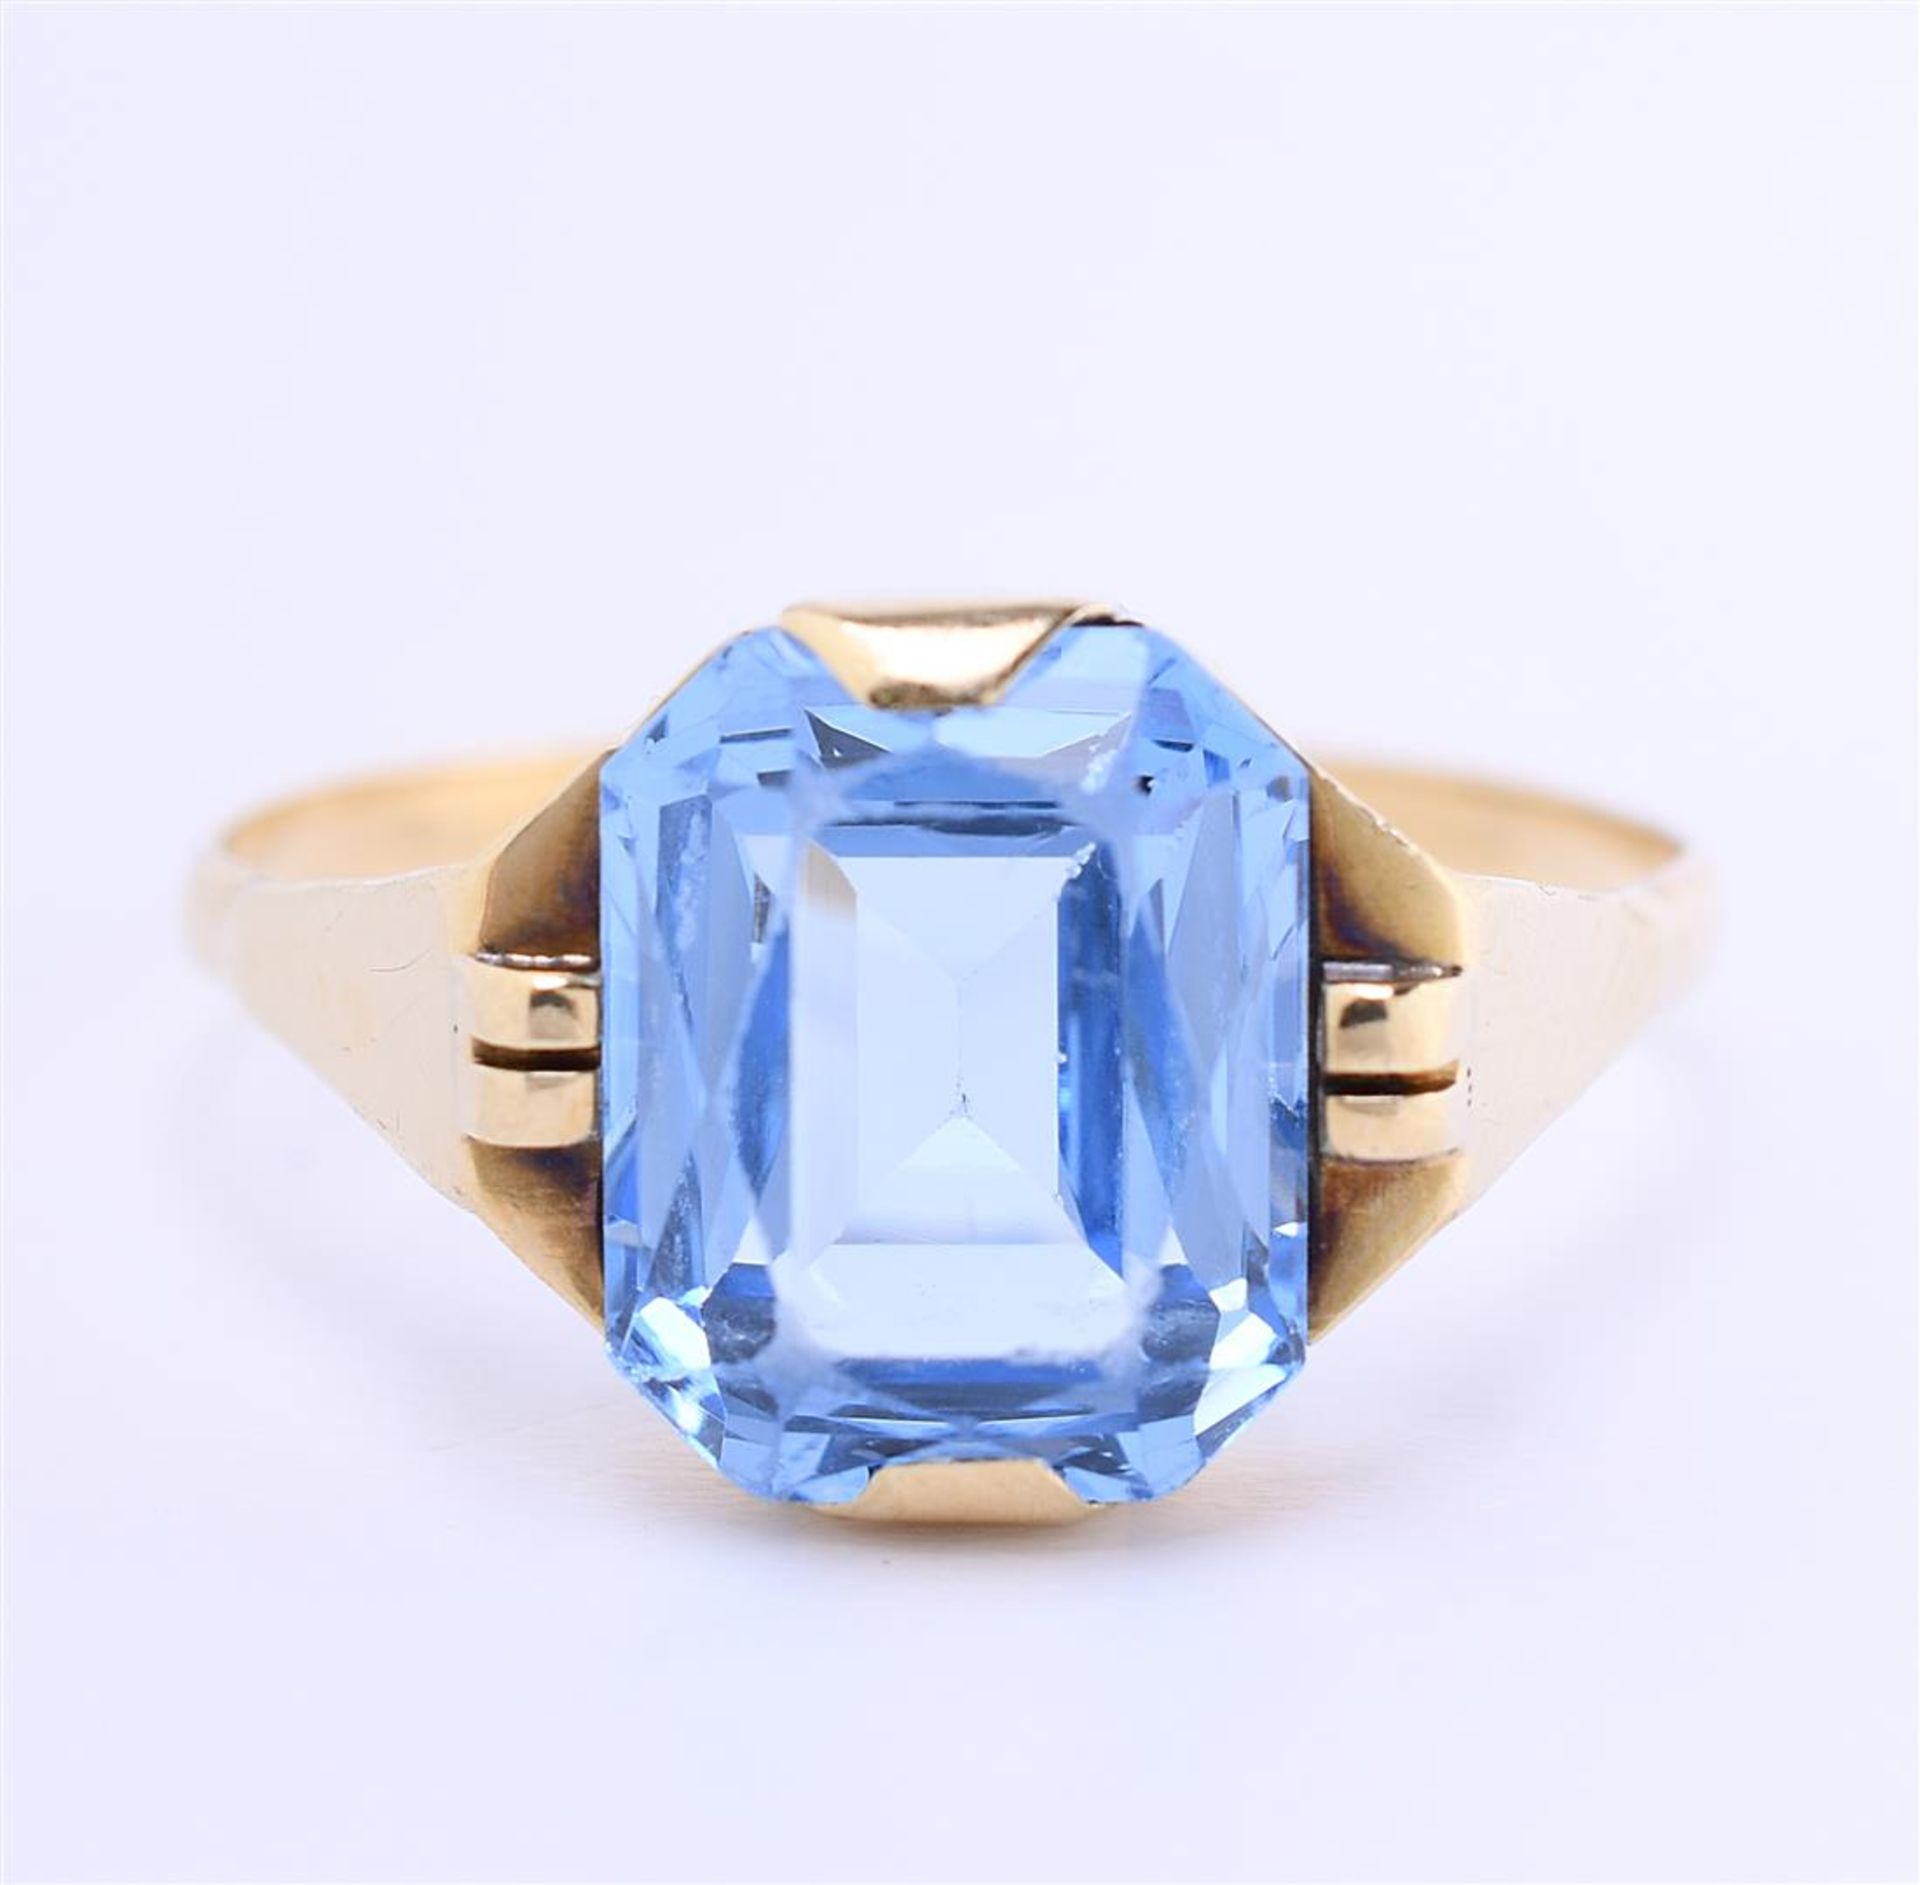 14 kt yellow gold solitaire ring set with emerald cut imitation aquamarine